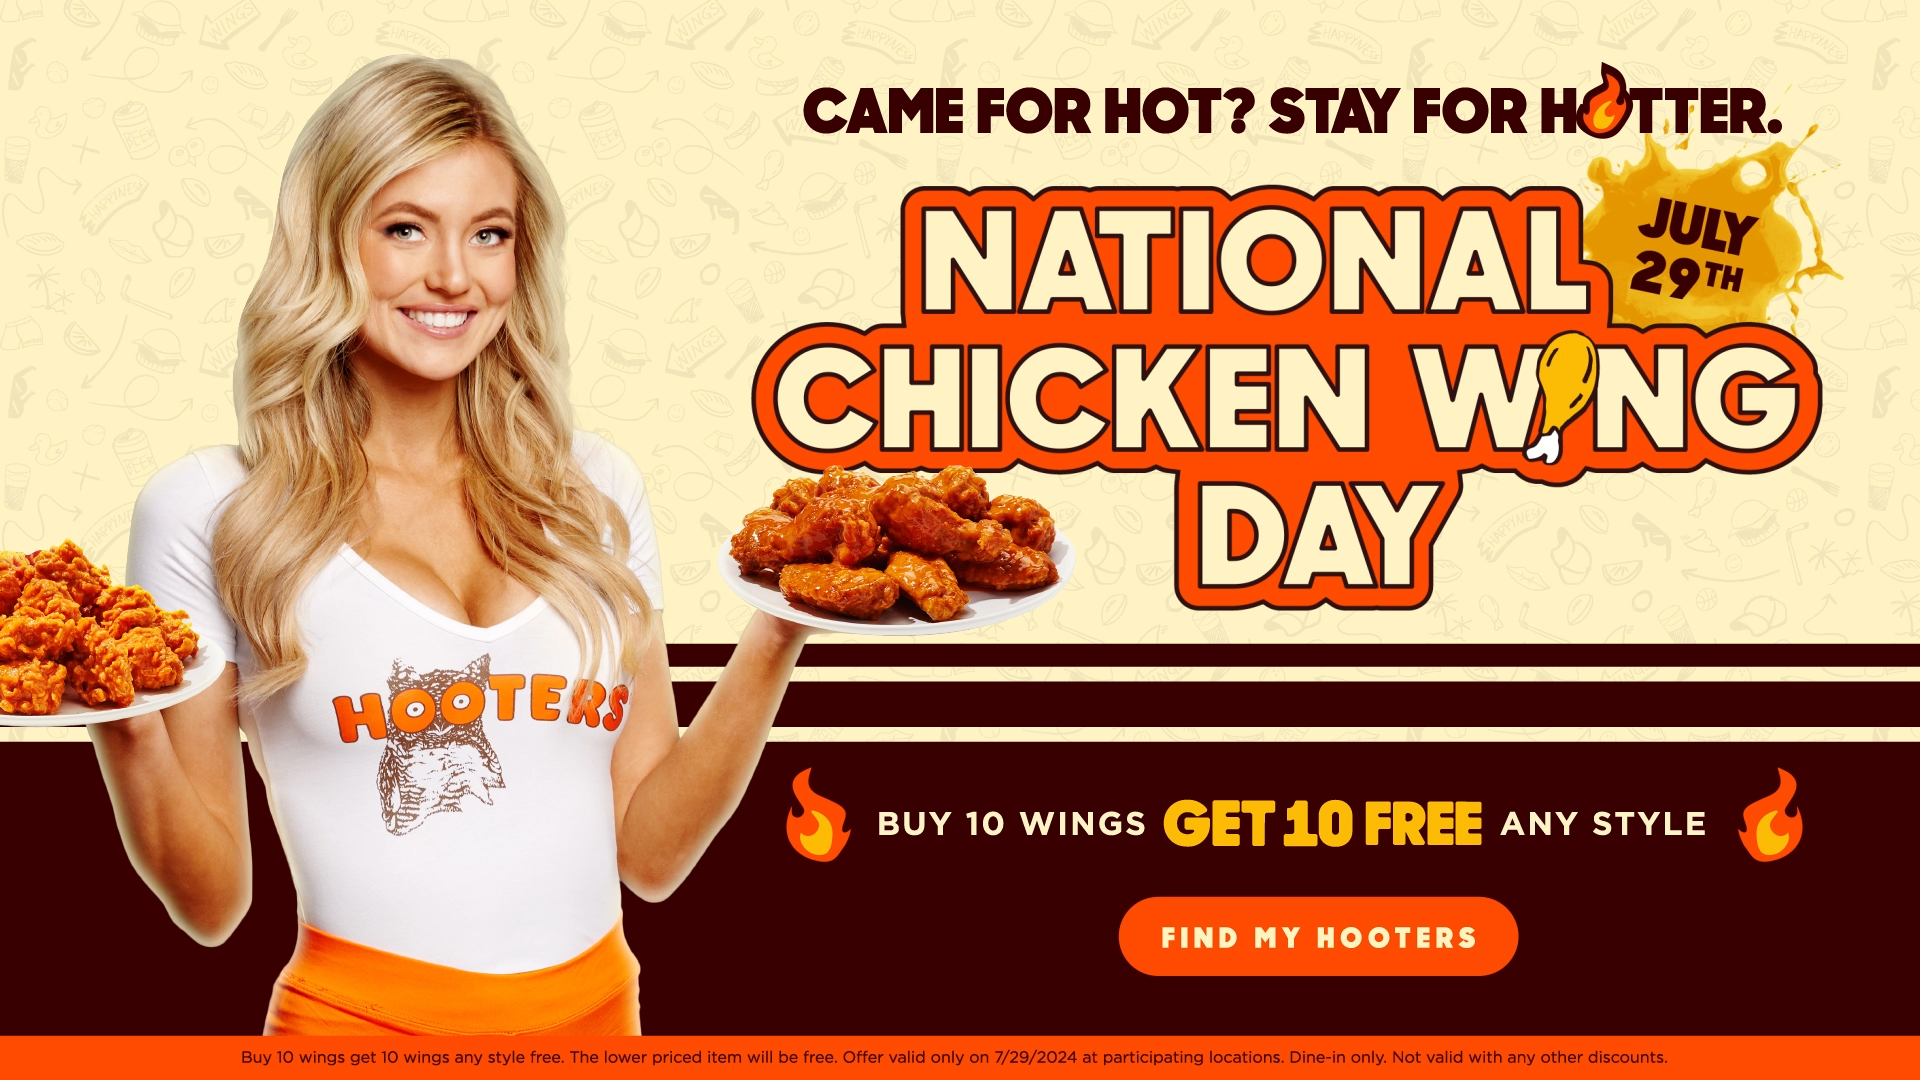 National Chicken Wing Day Buy 10 Wings, Get 10 Wings Free any style